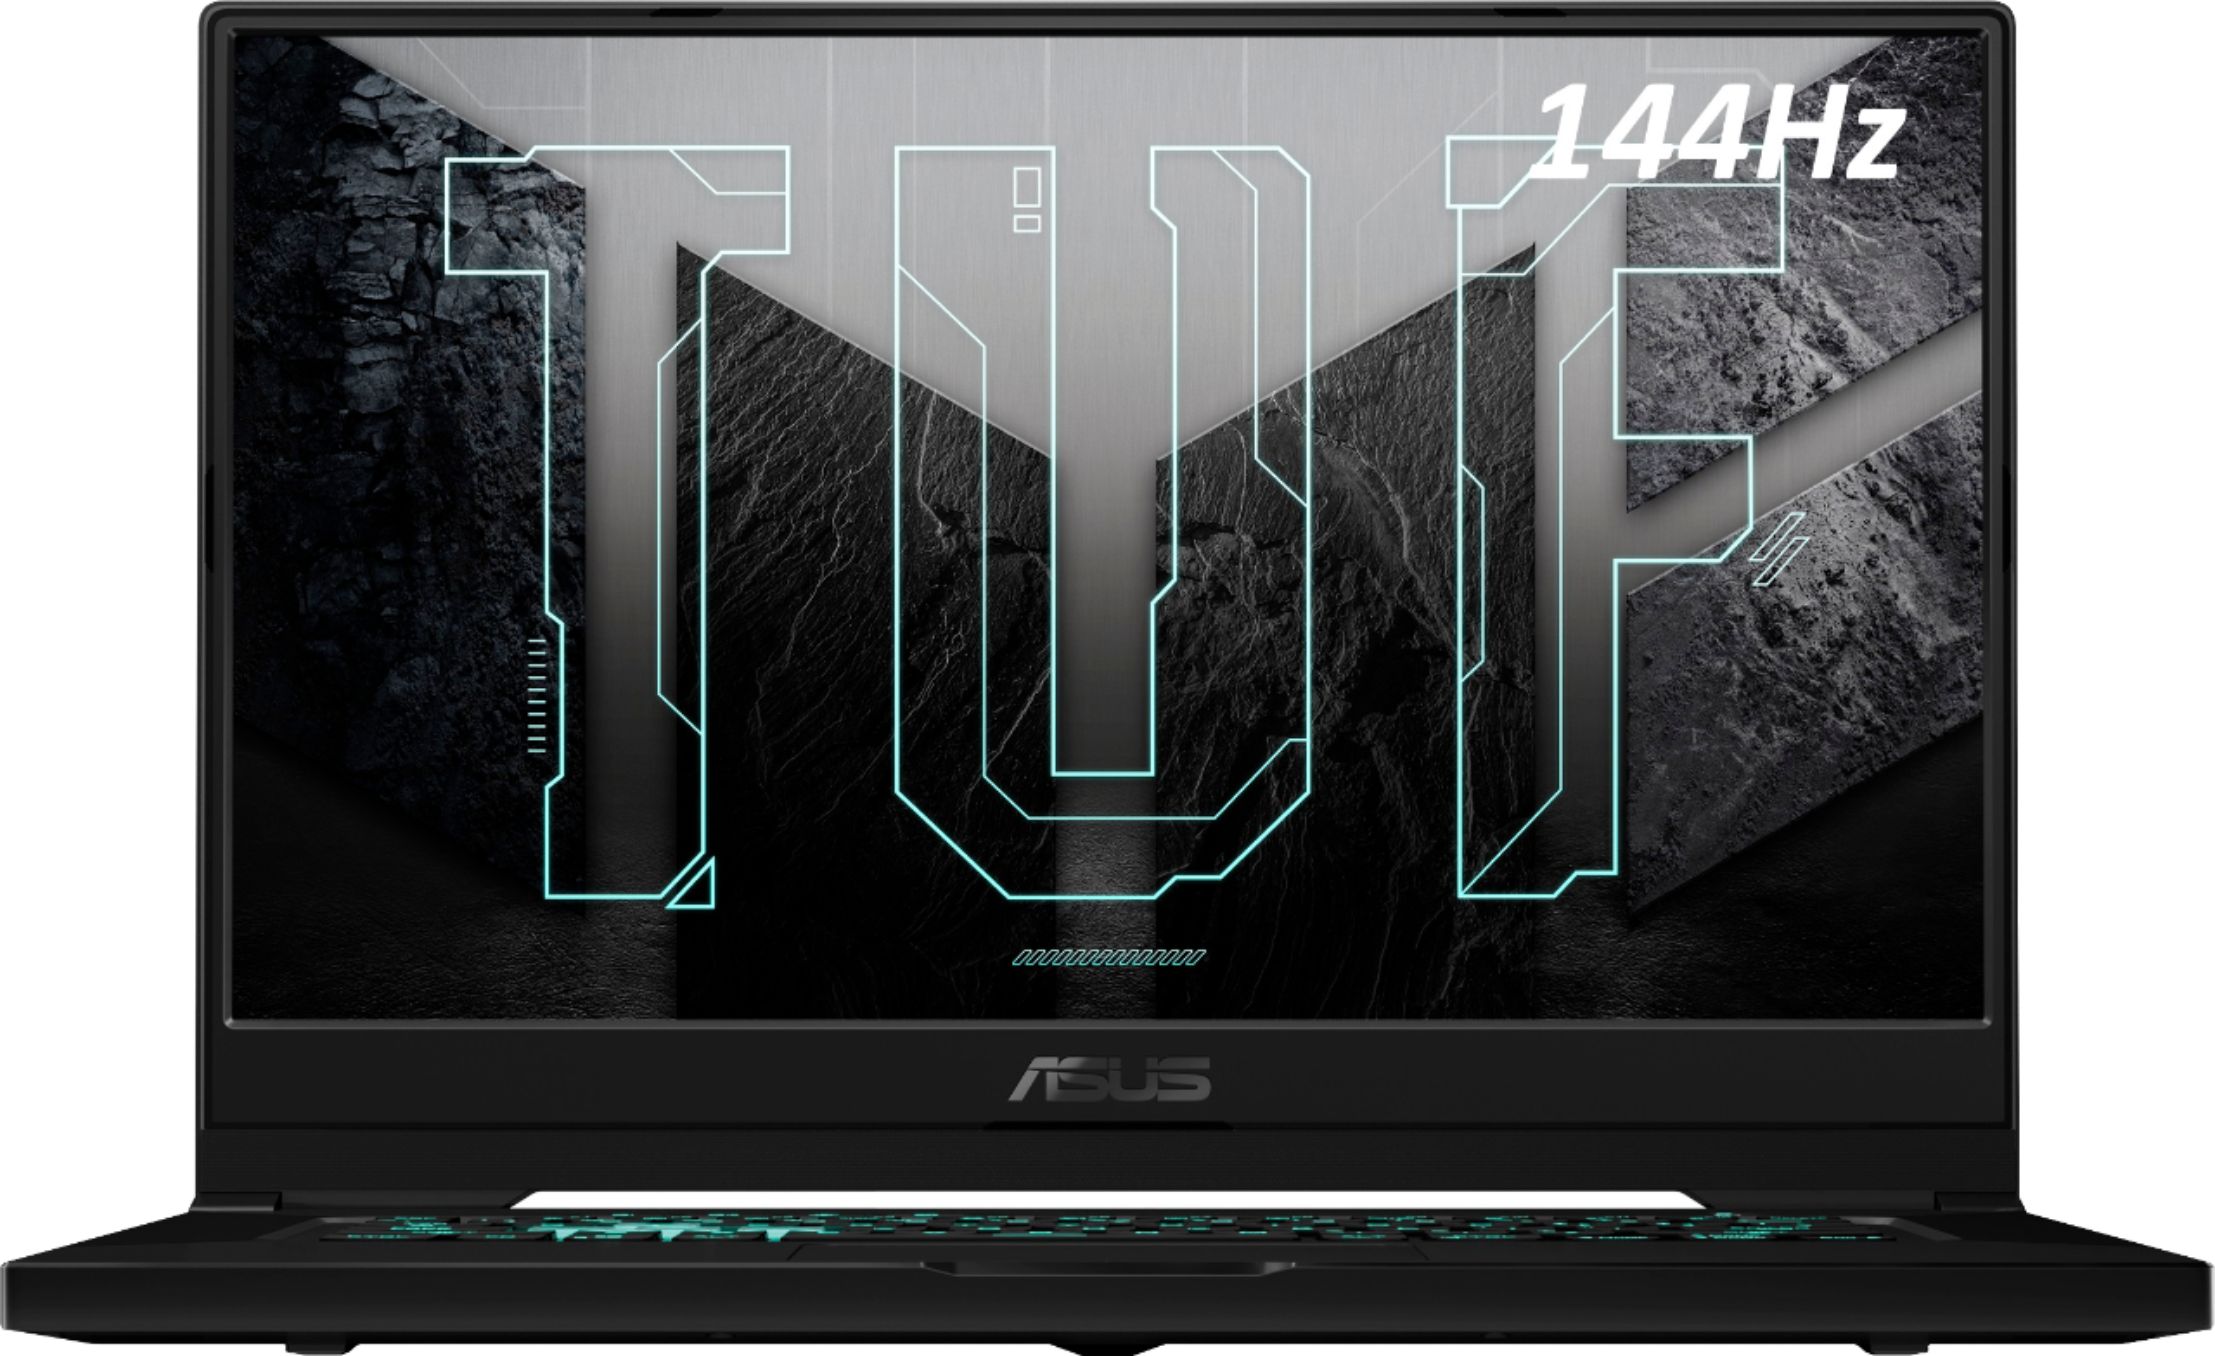 This Asus TUF Dash F15 gaming laptop with GeForce RTX 3060 graphics, 11th generation Core i7 CPU and 16 GB of RAM is below $ 1100